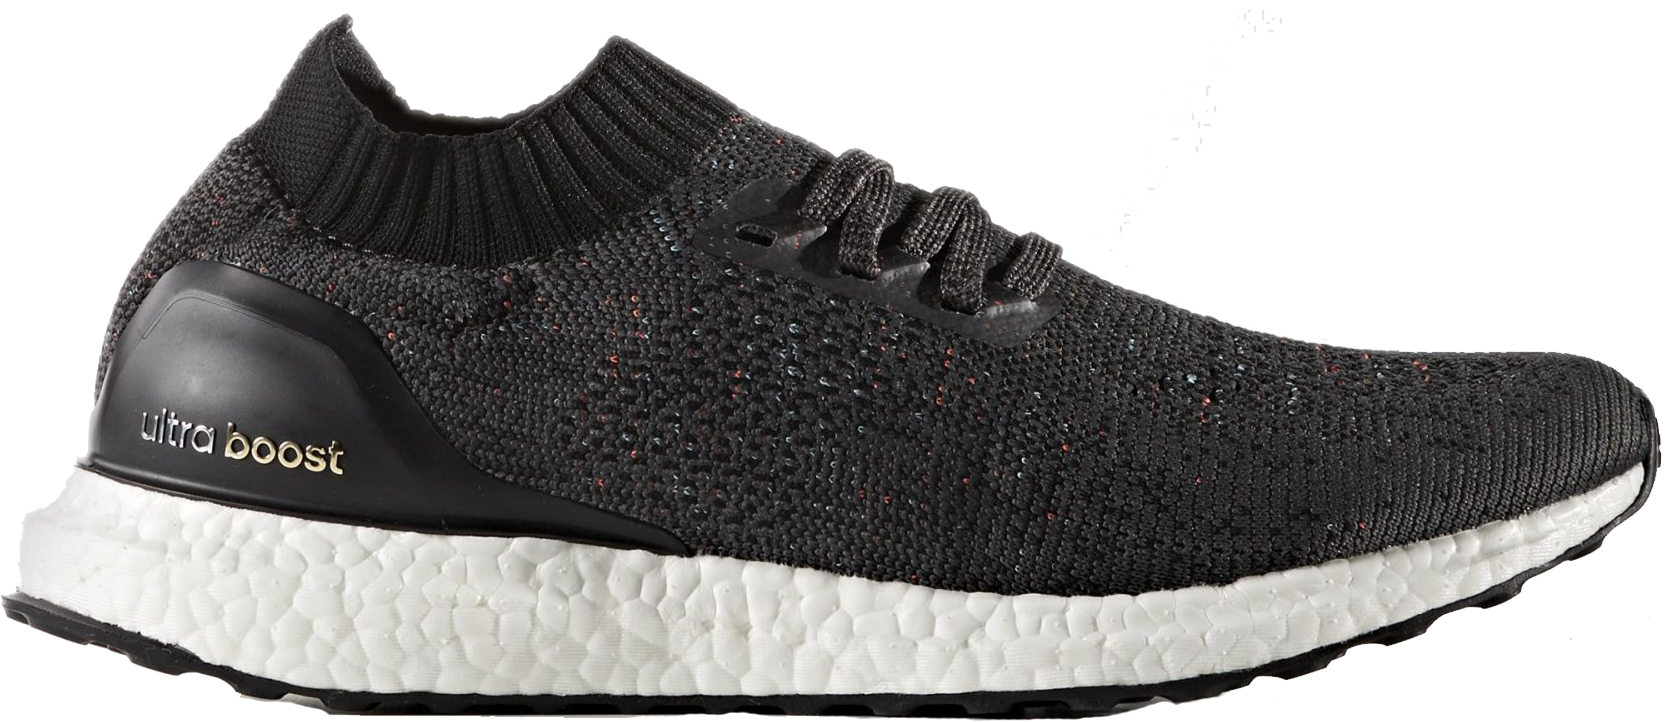 adidas ultra boost uncaged multicolor mens